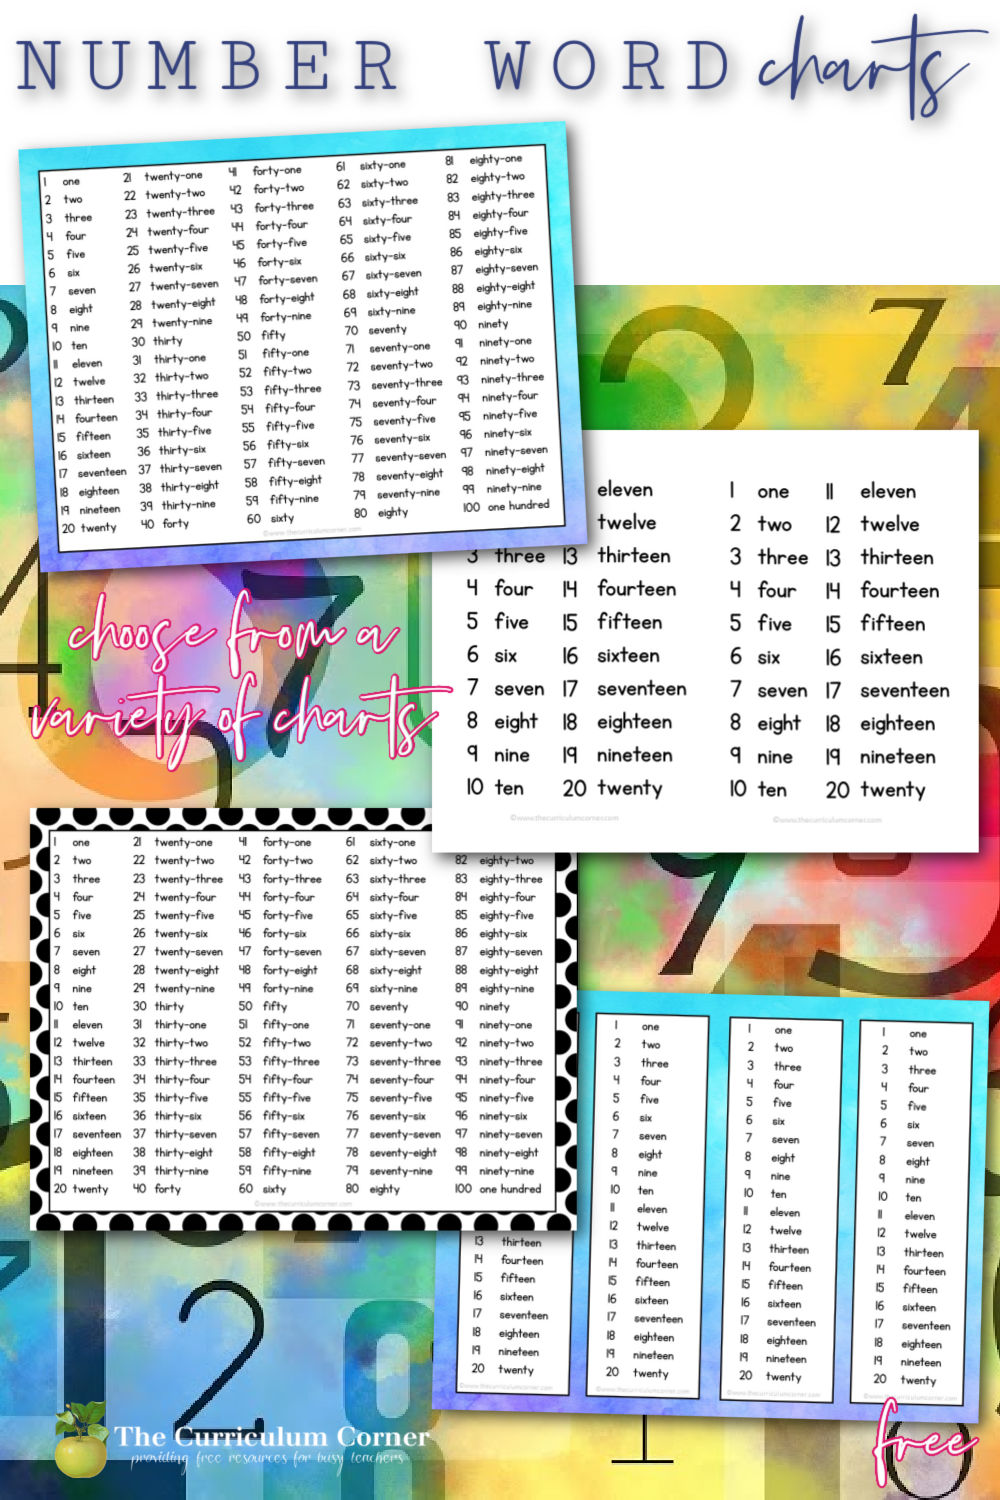 number word charts the curriculum corner 123